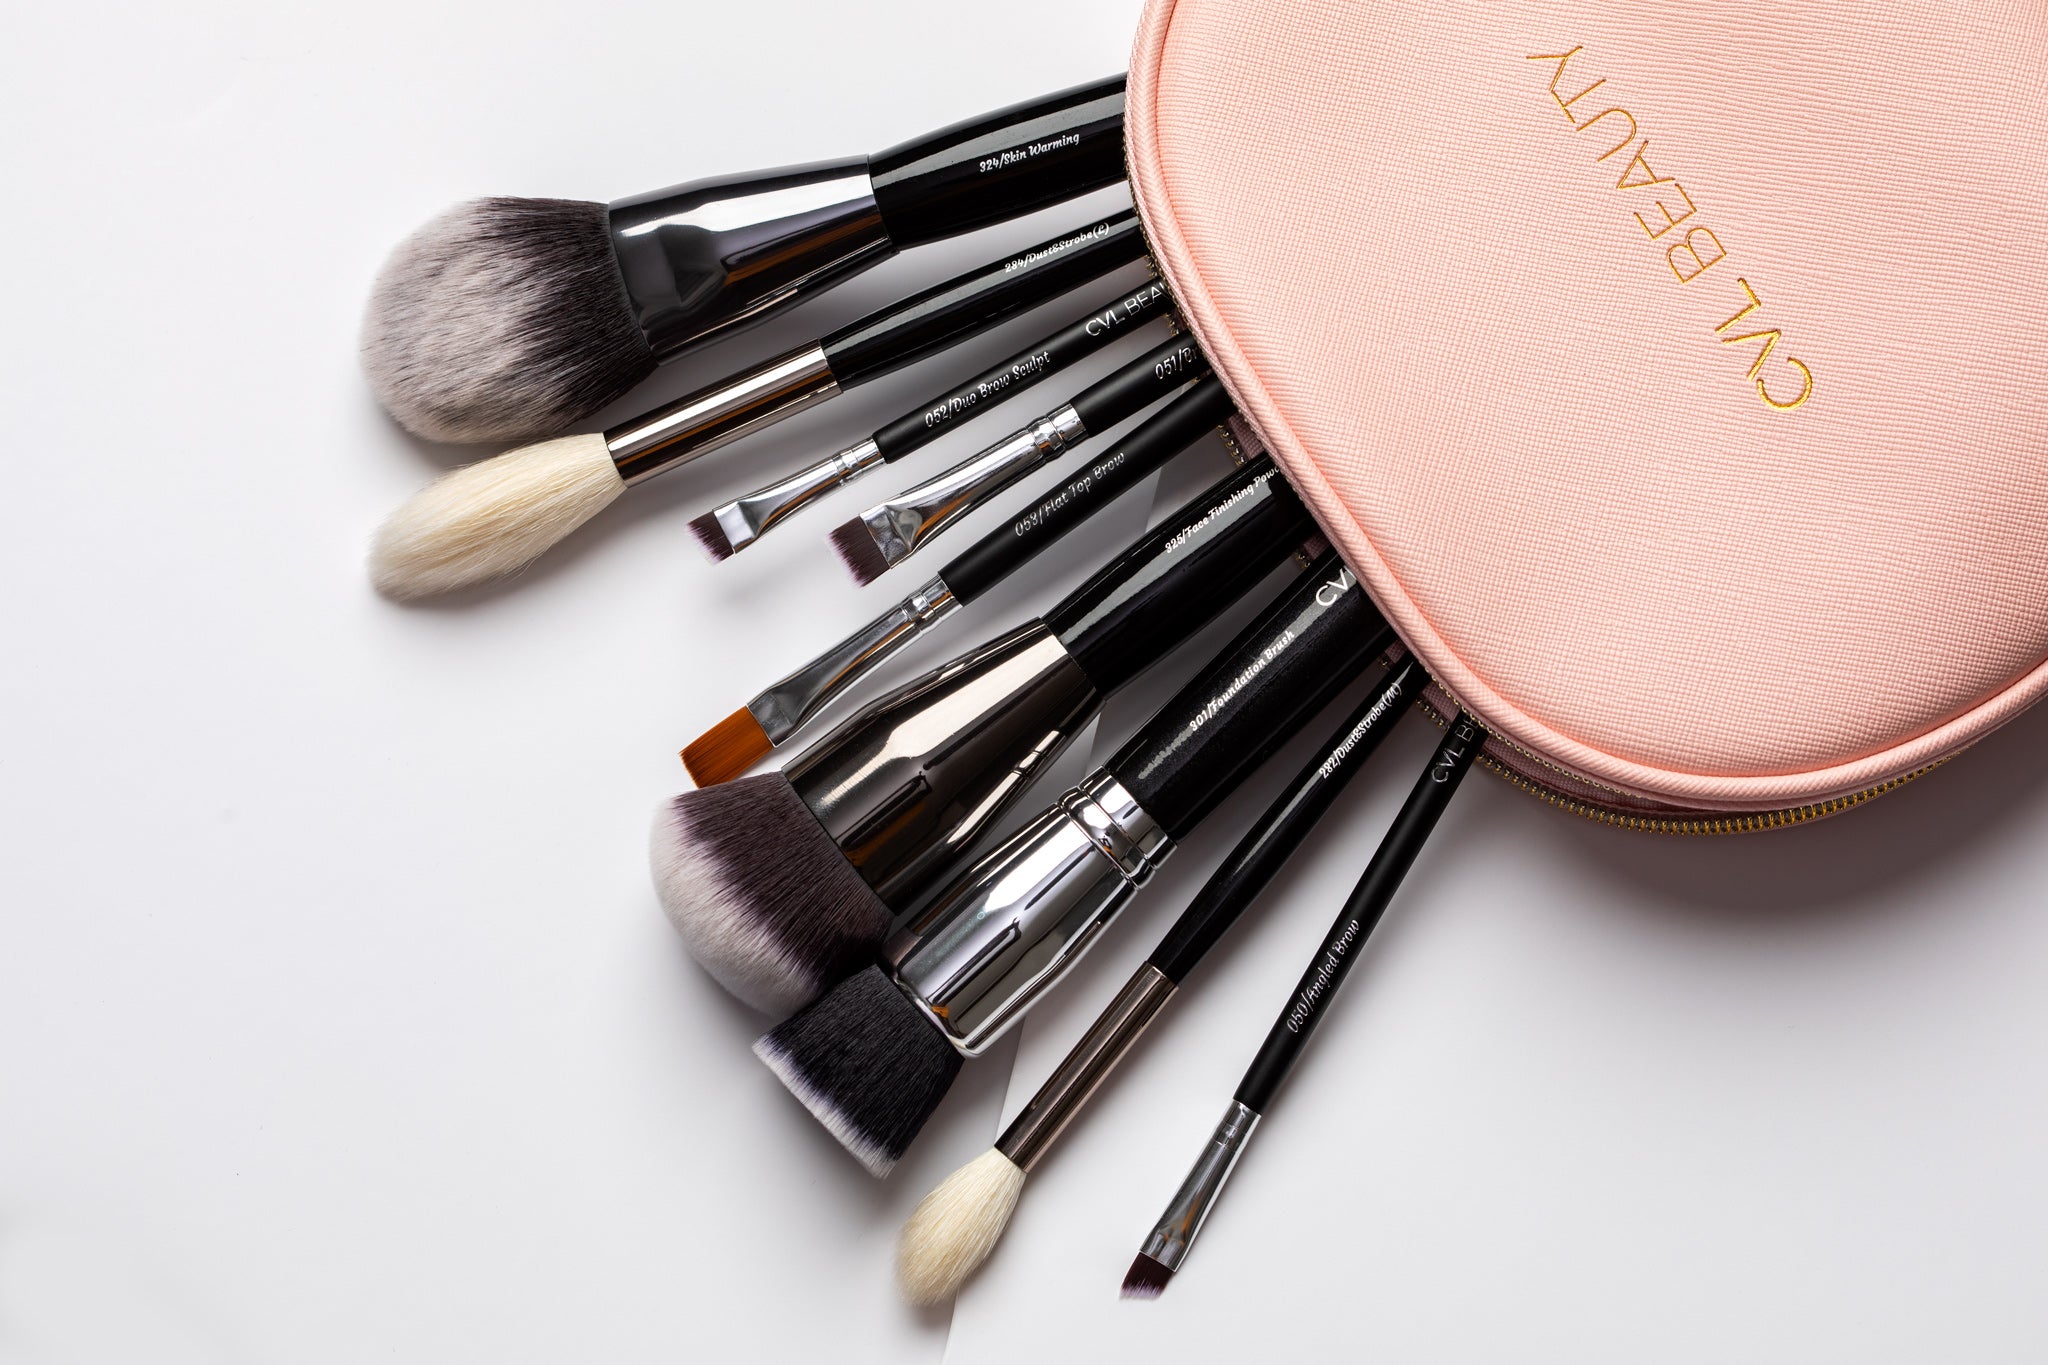 MAKE UP BRUSHES BY CVL BEAUTY